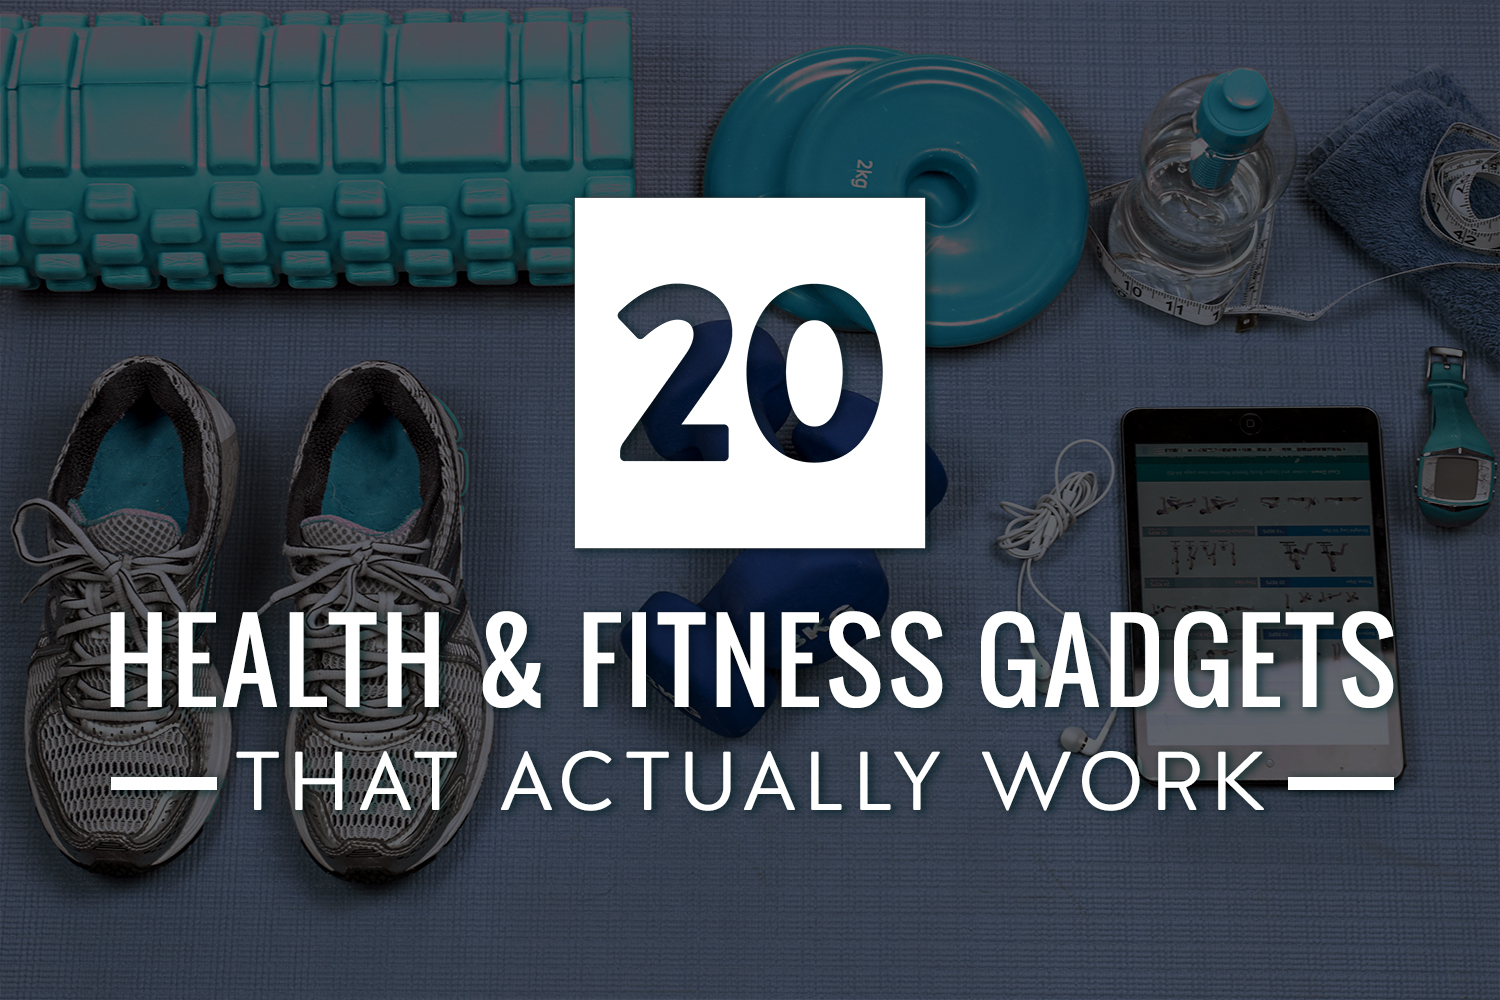 5 Best Health Gadgets to Help You Stay Fit and Healthy